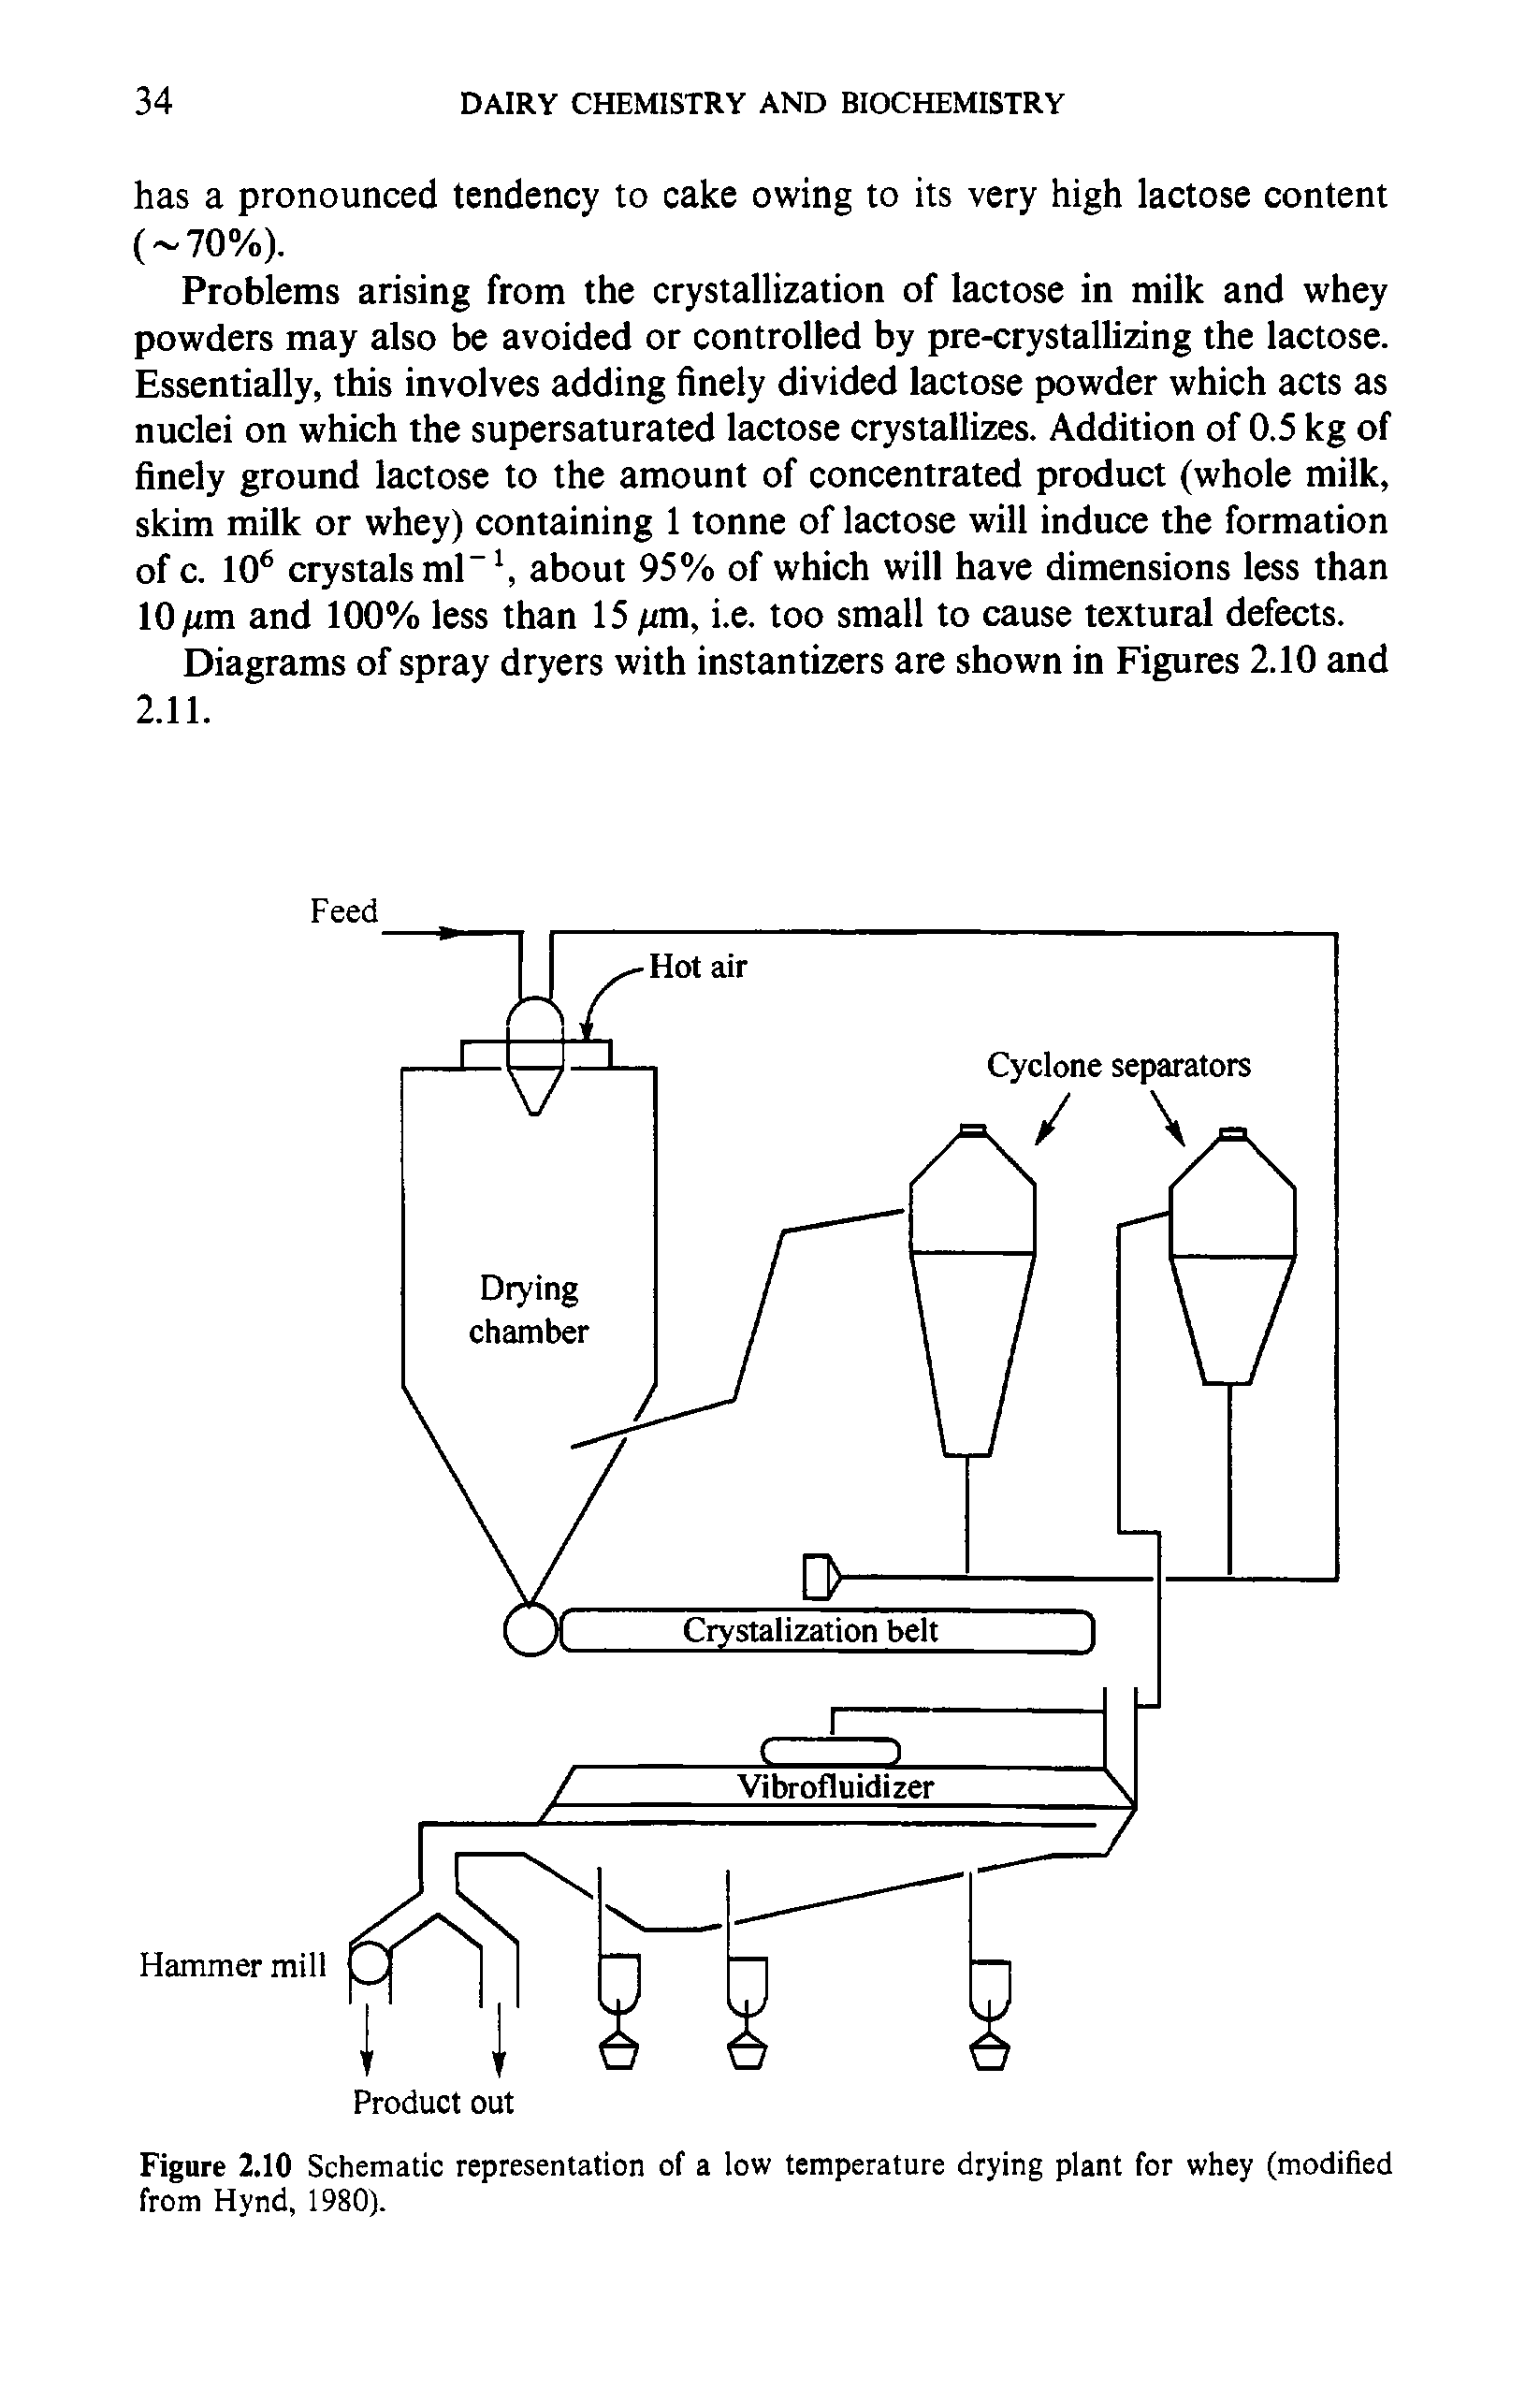 Figure 2.10 Schematic representation of a low temperature drying plant for whey (modified from Hynd, 1980).